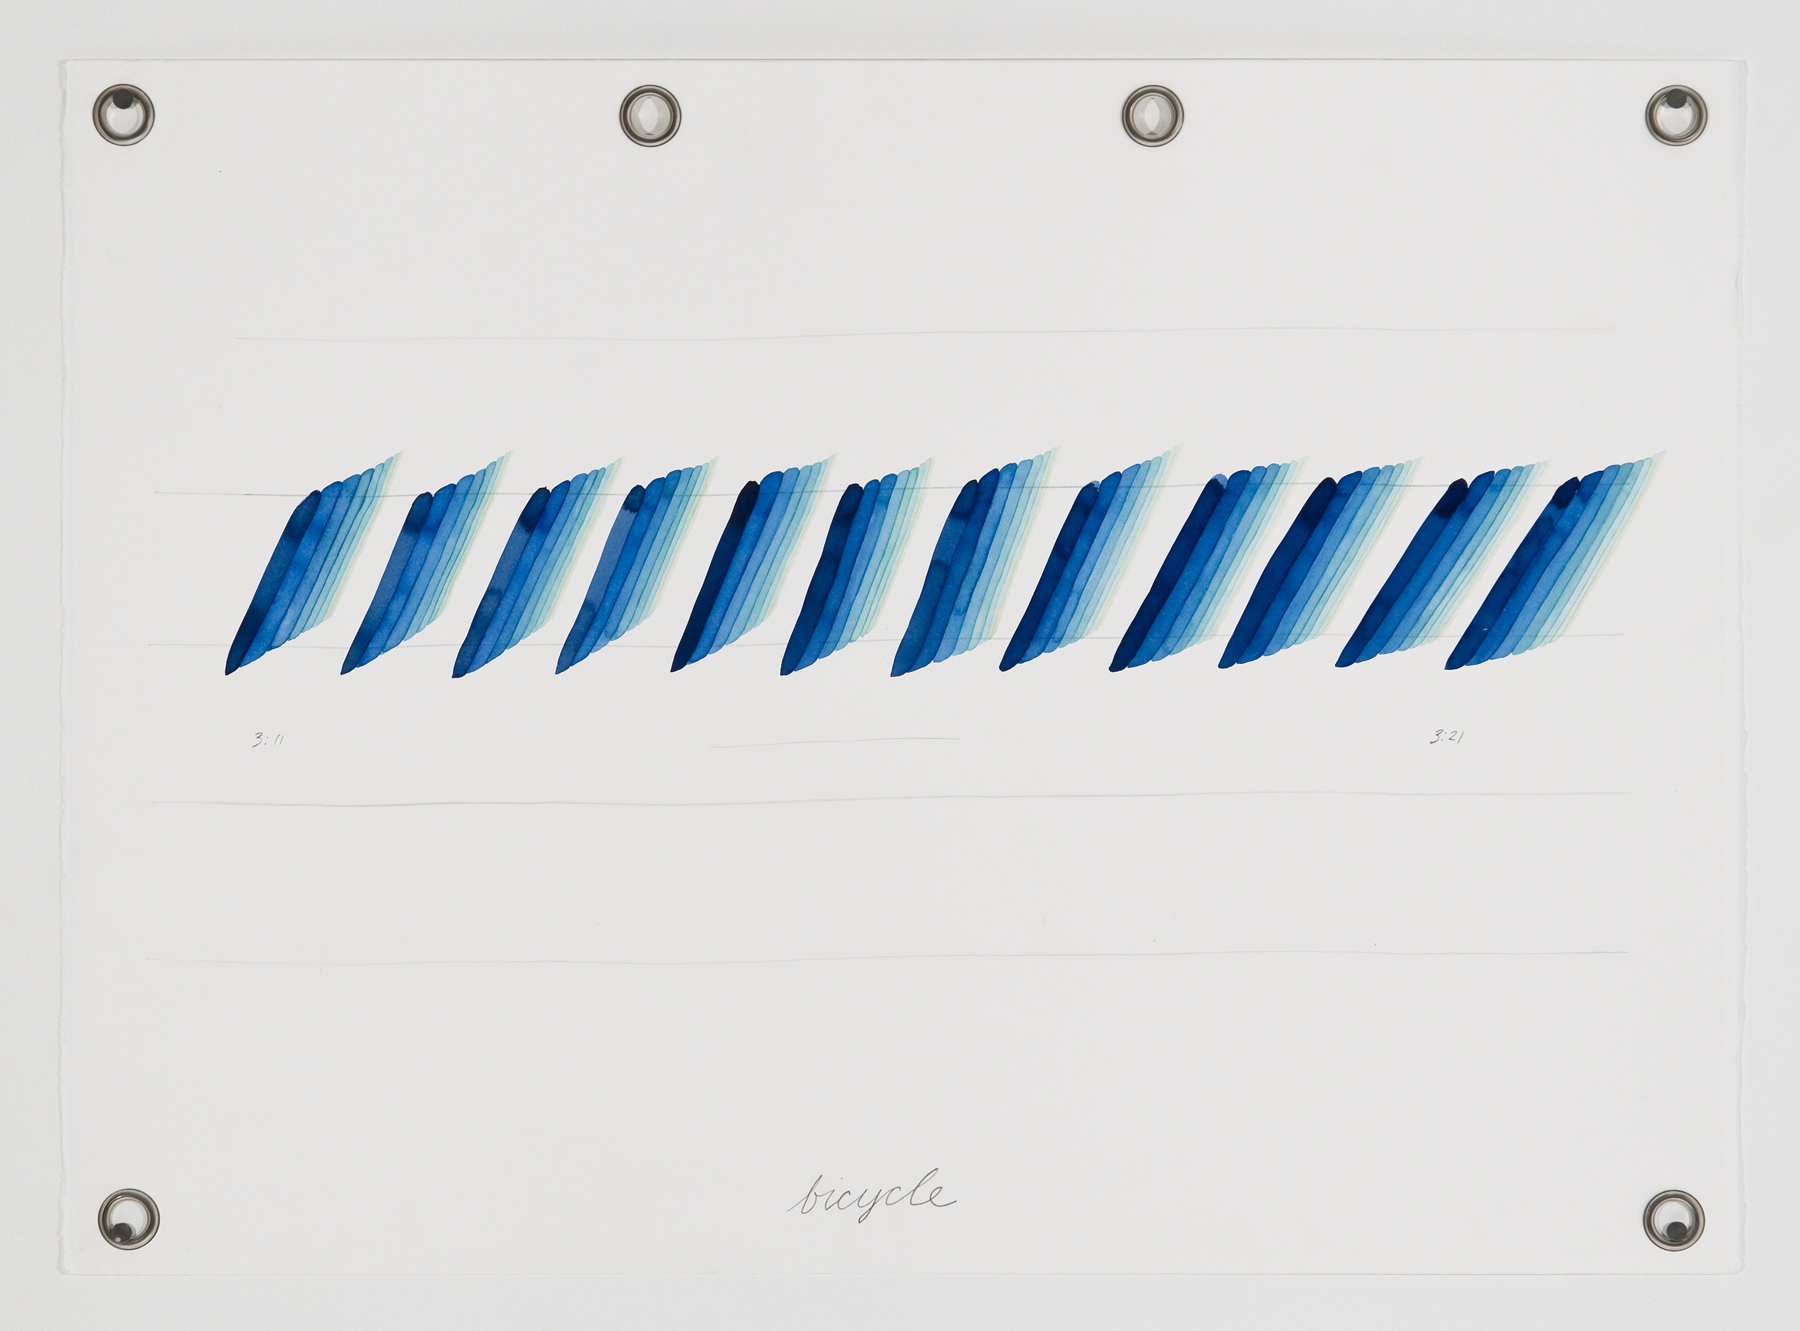   Ander Mikalson   Score for a Cyclone (Bicycle),&nbsp; 2013 watercolor and graphite on paper, metal grommets 22 x 30 inches 